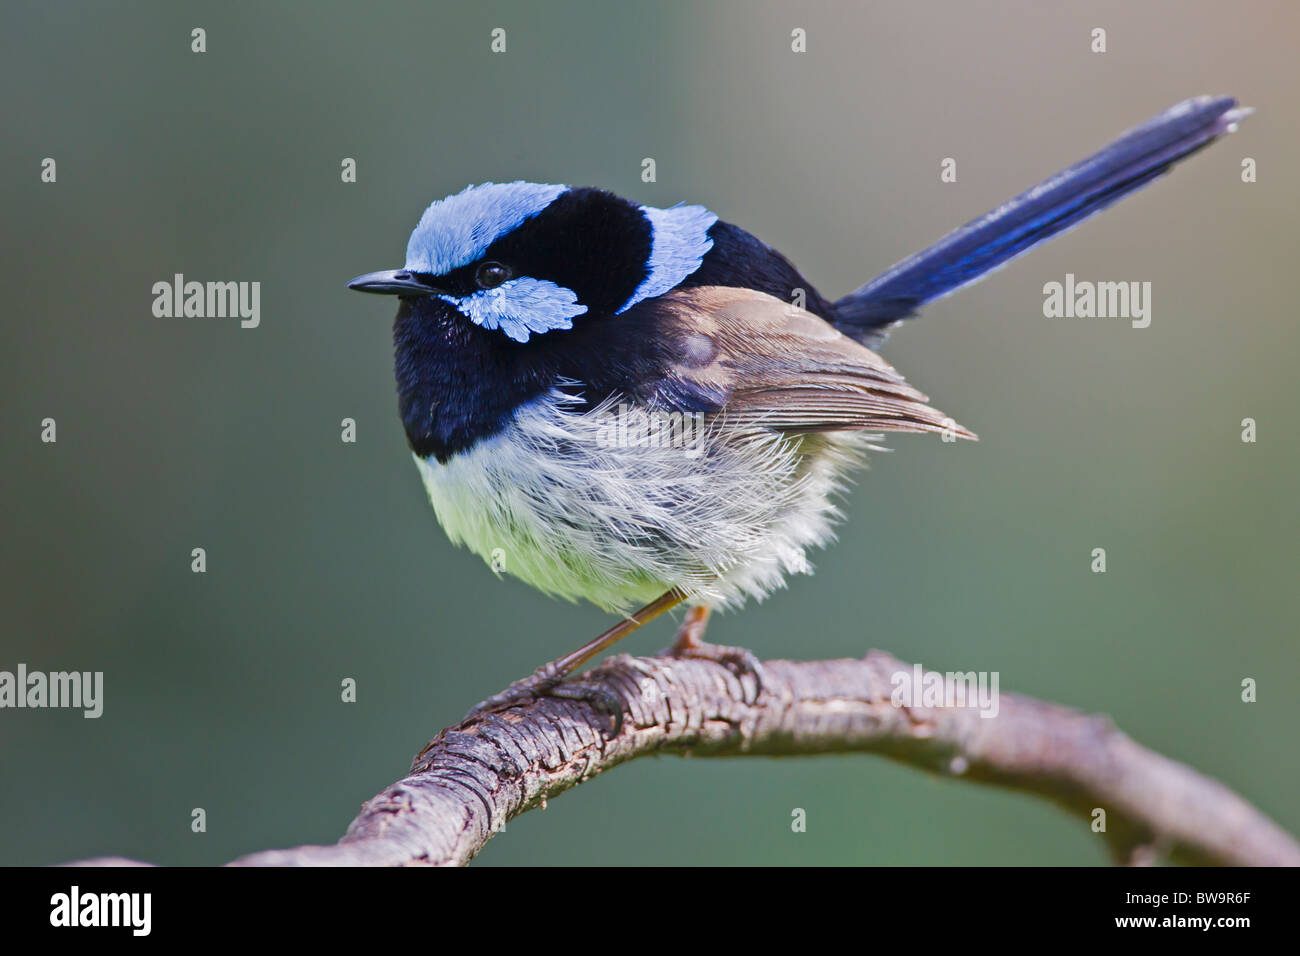 SUPERB FAIRY-WREN PERCHED ON A BRANCH Stock Photo